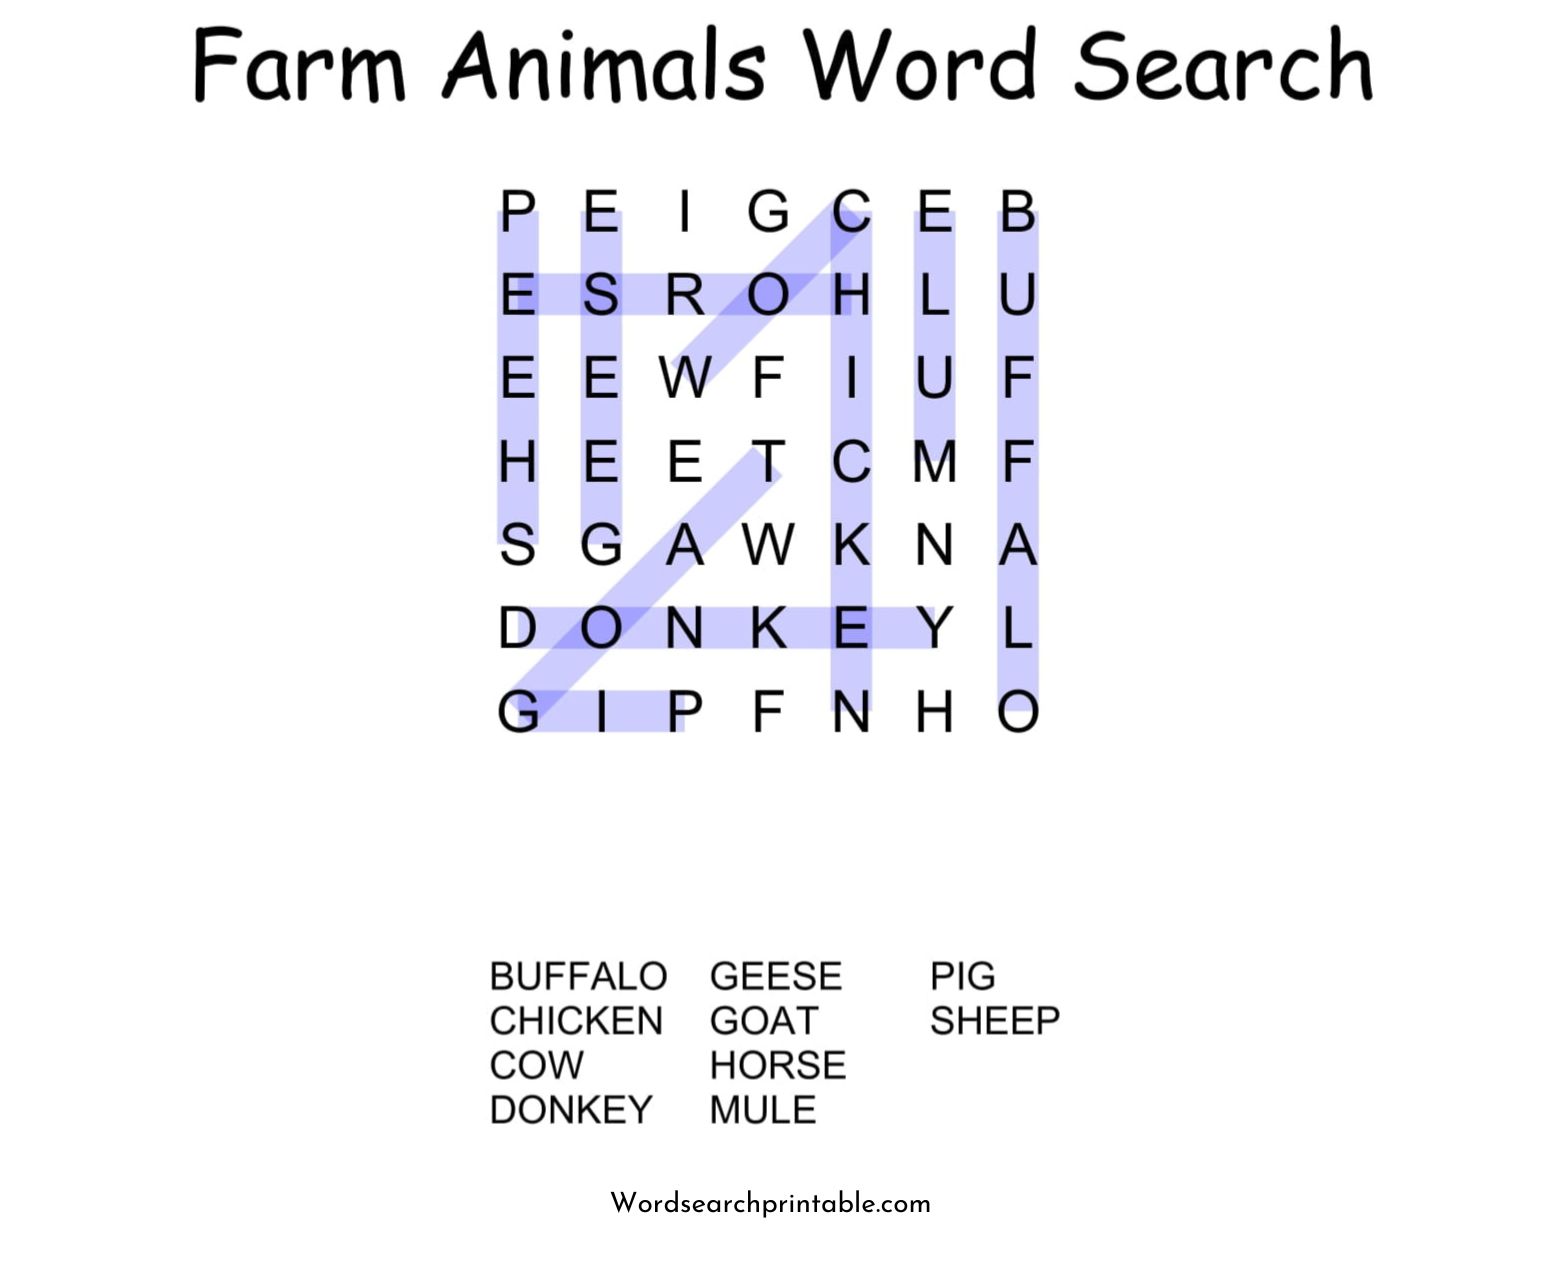 farm animals word search puzzle solution